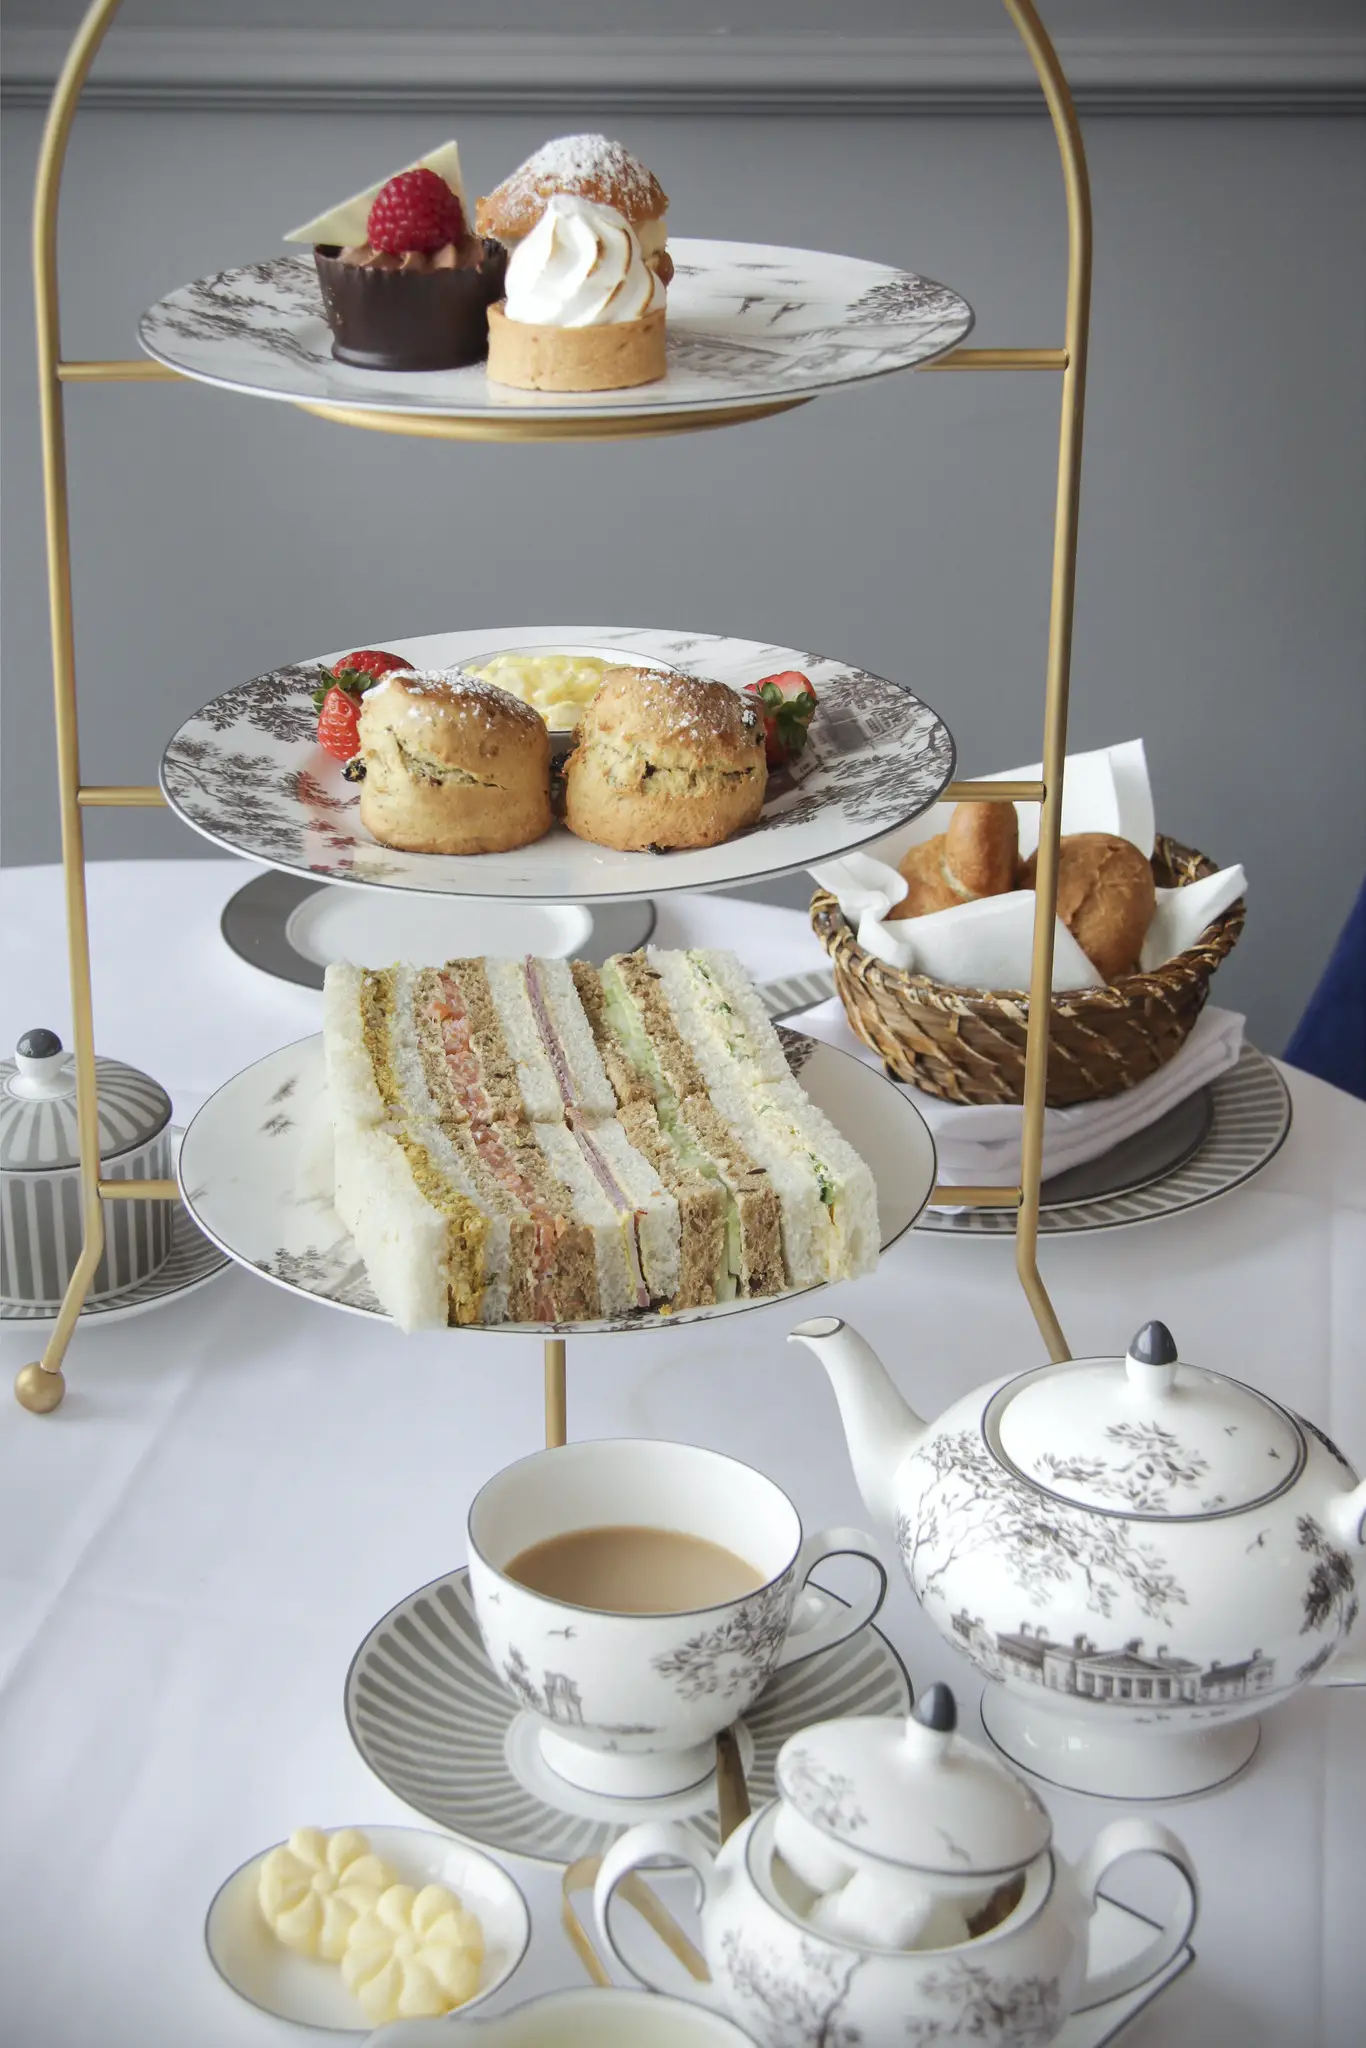 Traditional British three-tiered Afternoon Tea and scones